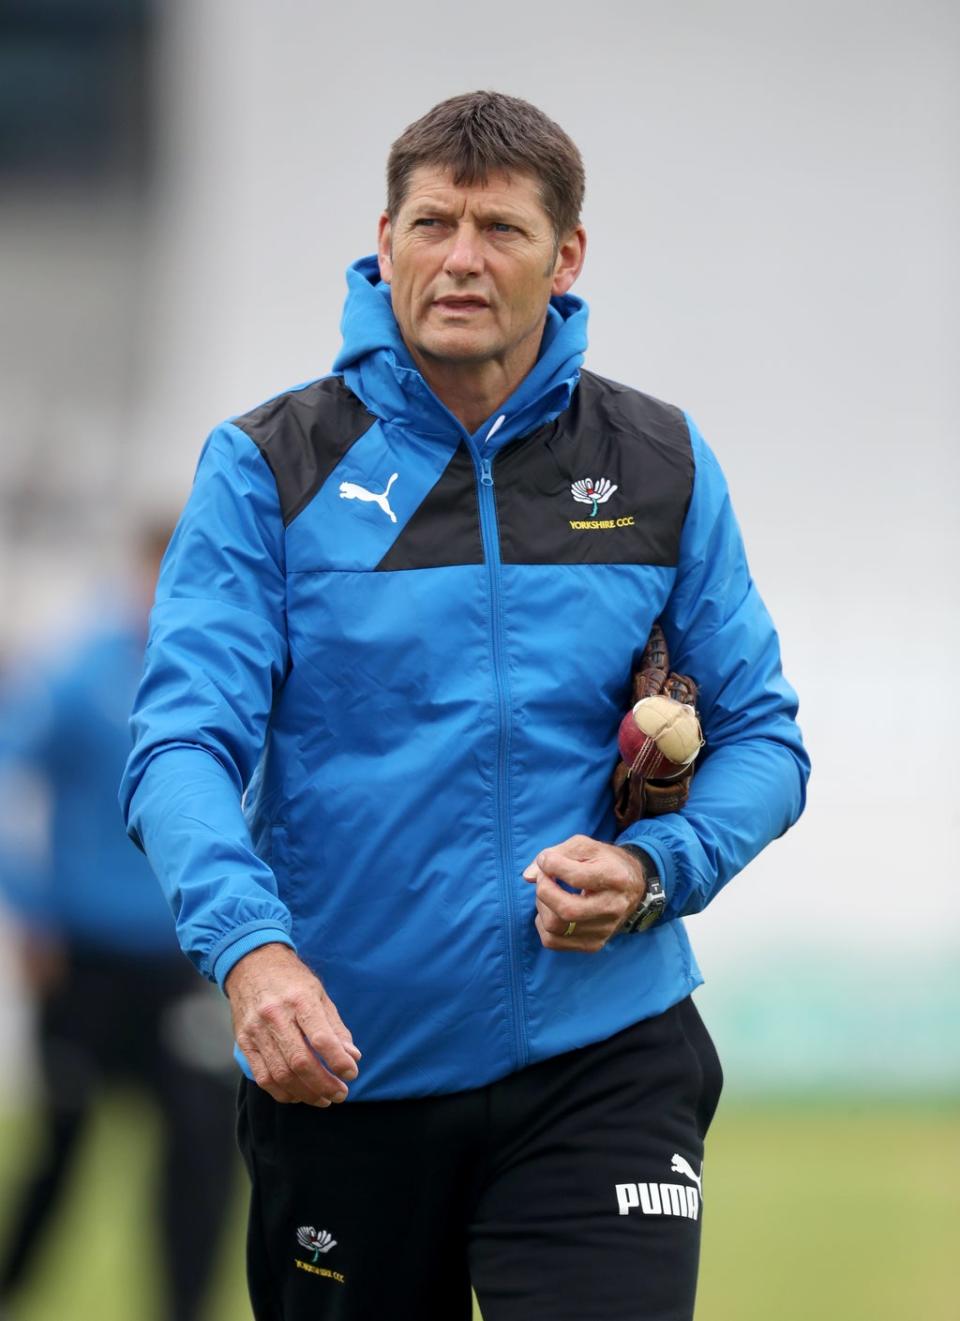 Martyn Moxon was the long-serving director of cricket at Yorkshire (Mike Egerton/PA) (PA Wire)